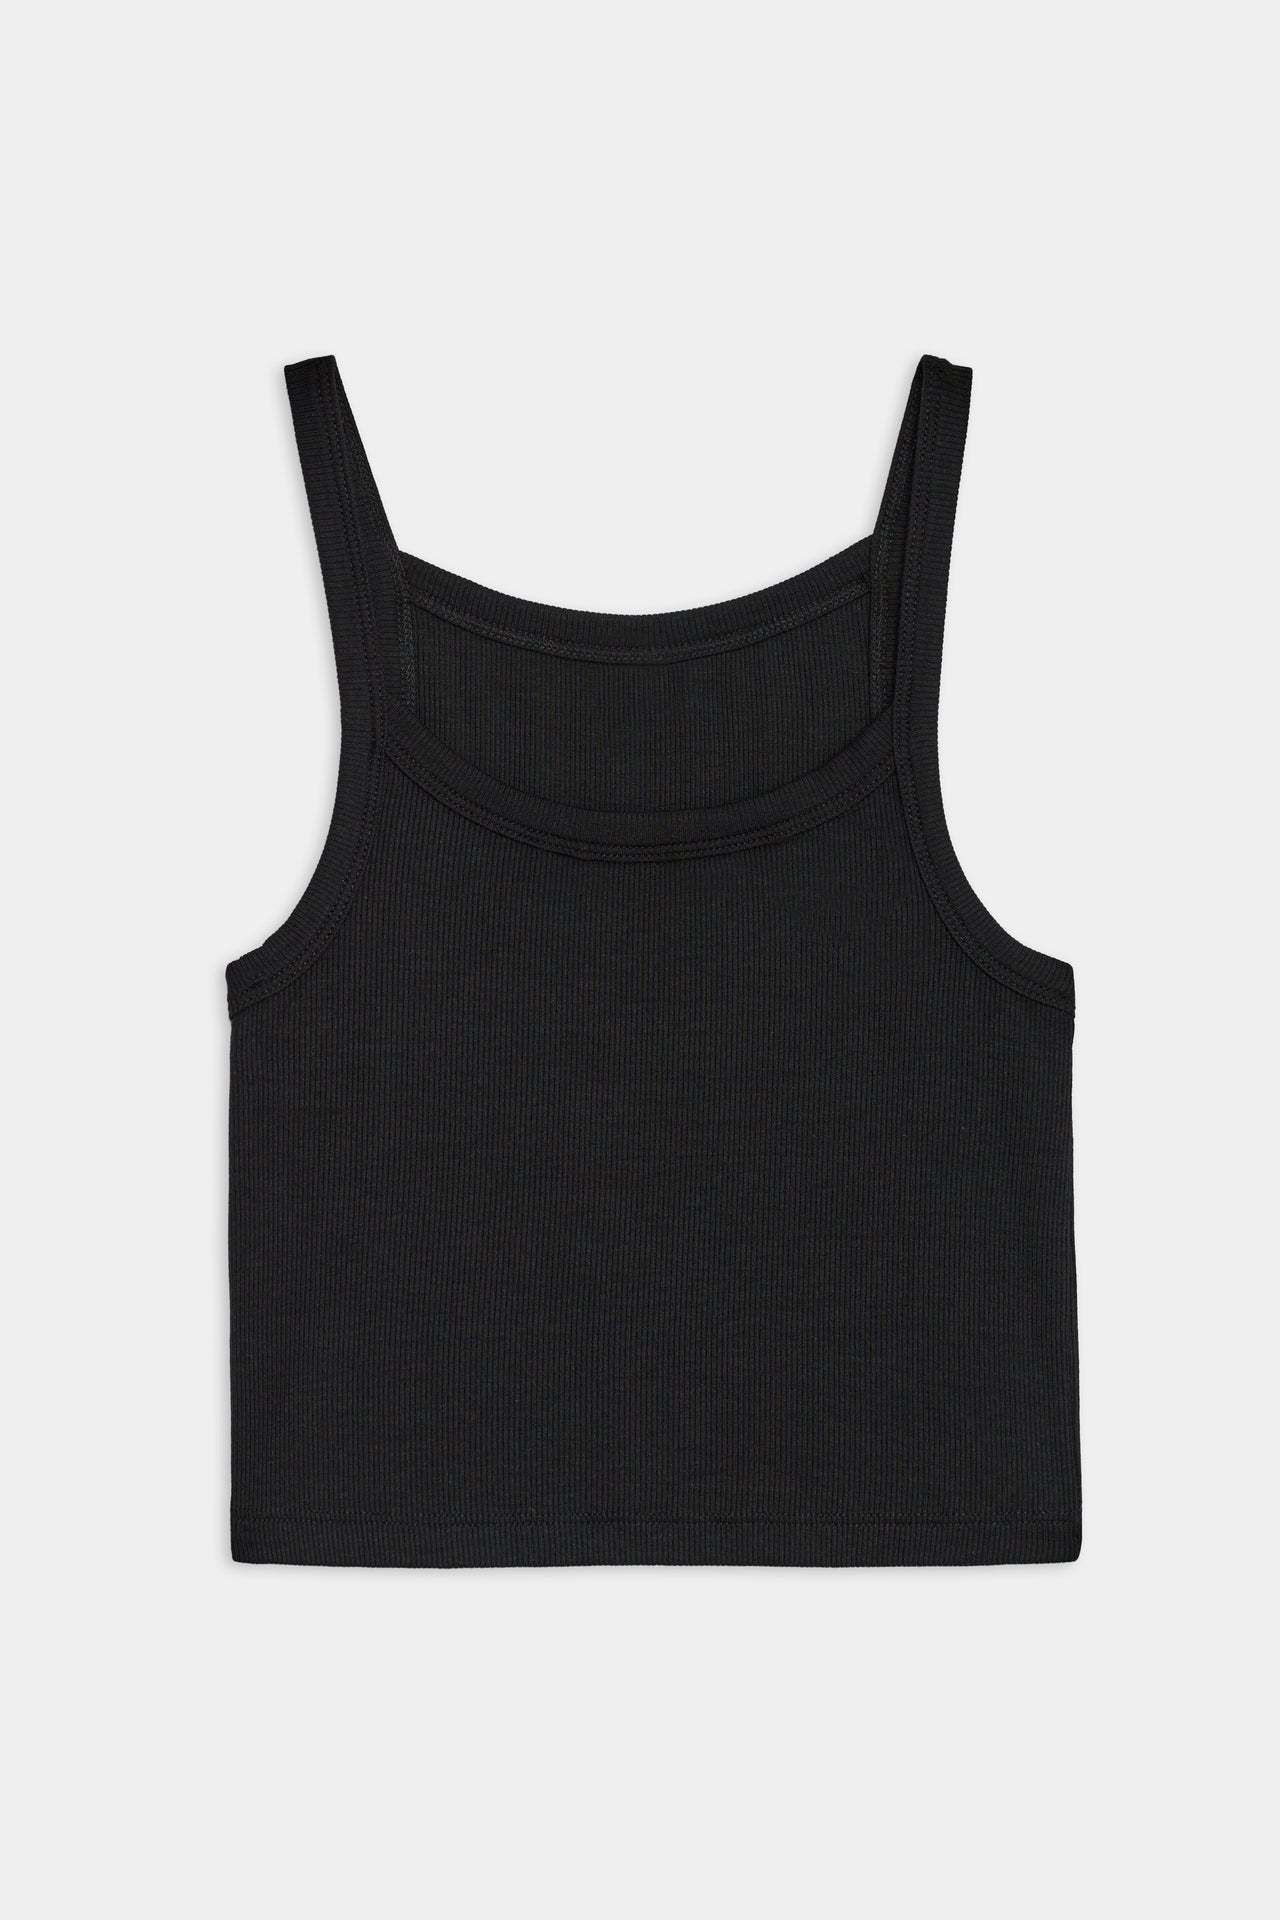 Flat view of black ribbed square neck tank top